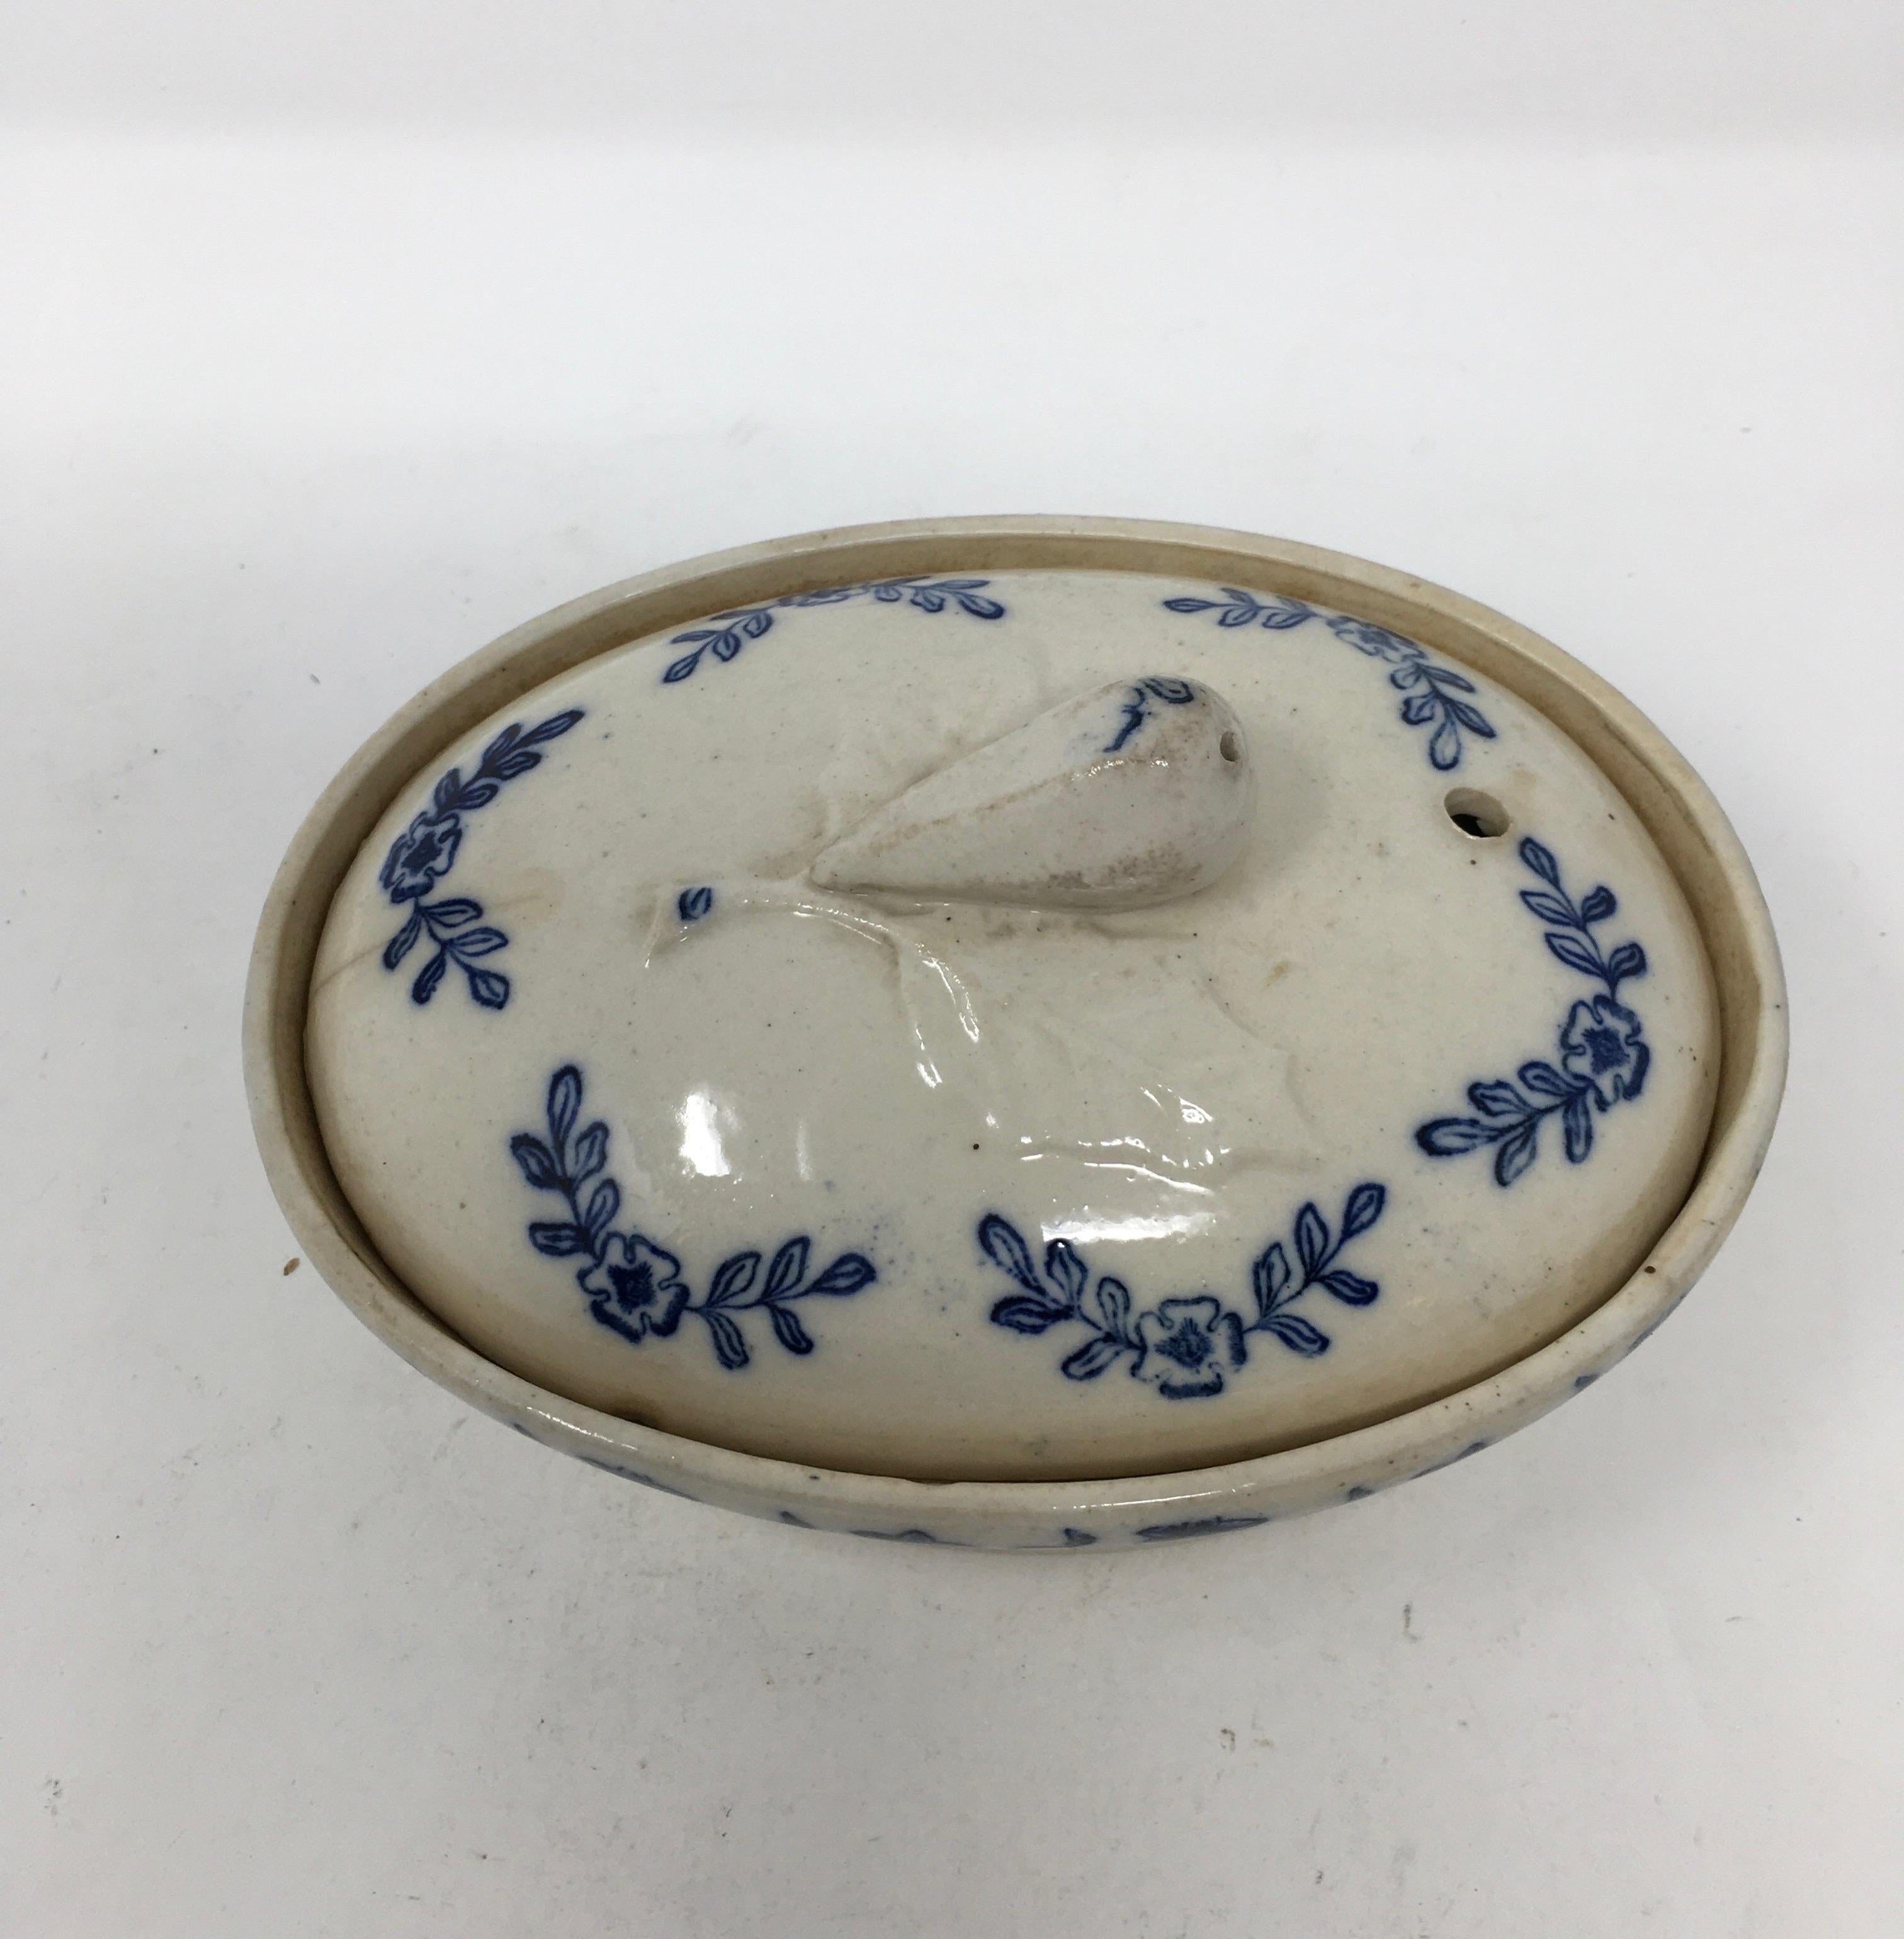 Found in France, this antique ironstone Terre de Fonte small covered casserole dish has lovely blue floral transferred design. The piece is complete with a pull handle in the shape of fruit on the lid and two handles on the casserole itself. Signed